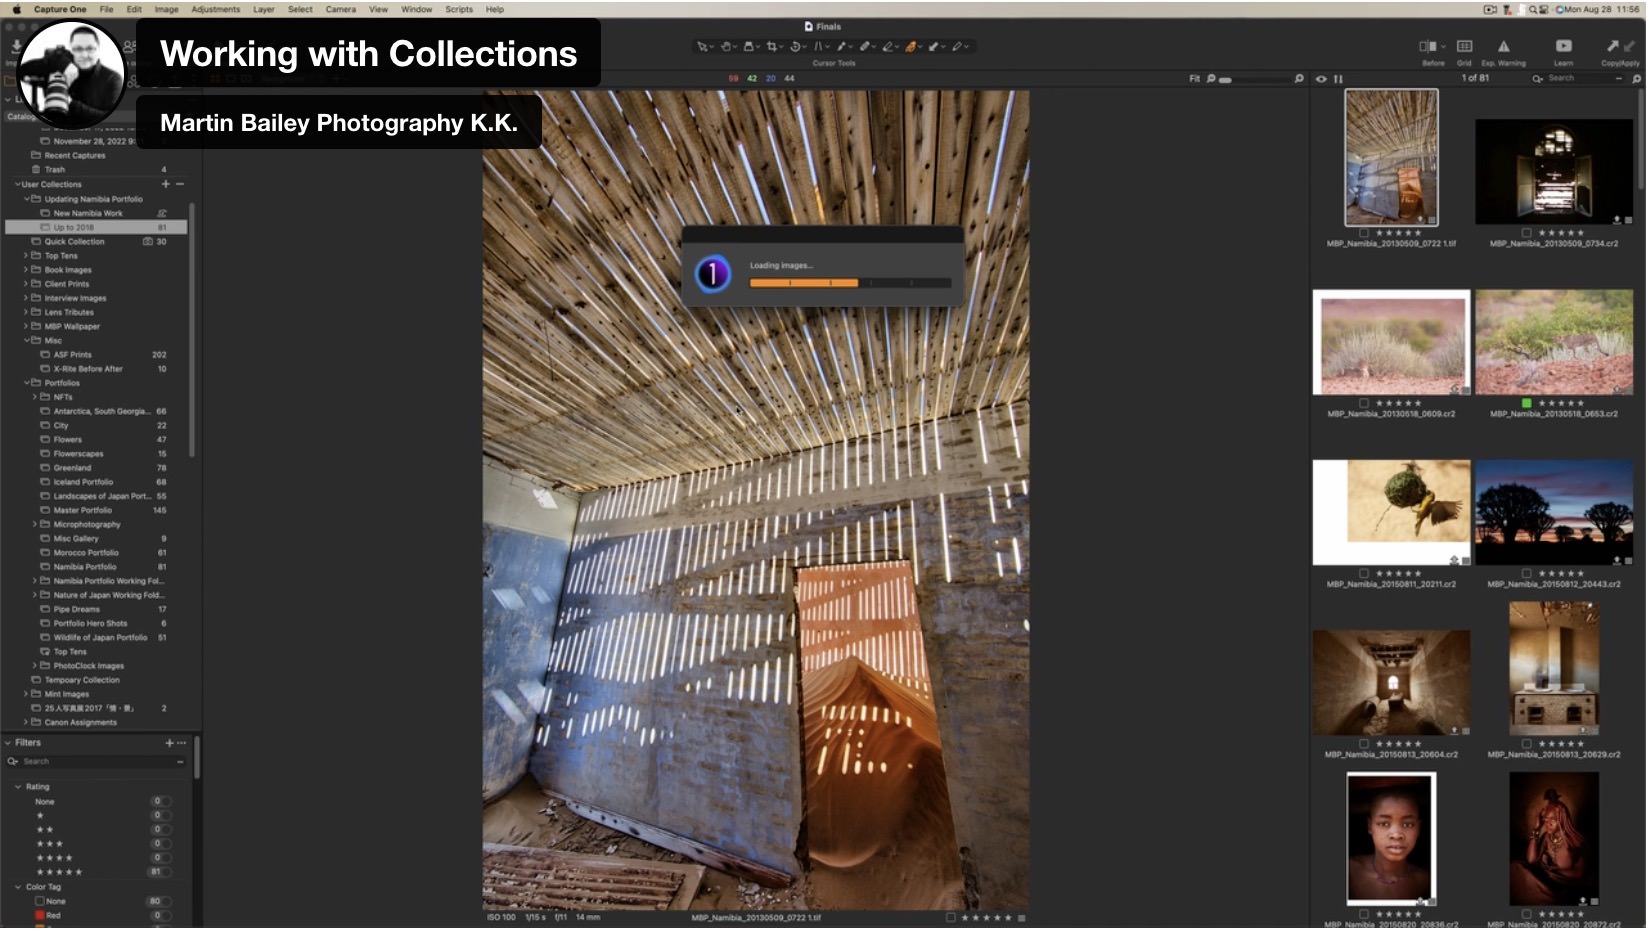 Working with Collections Featured Photo